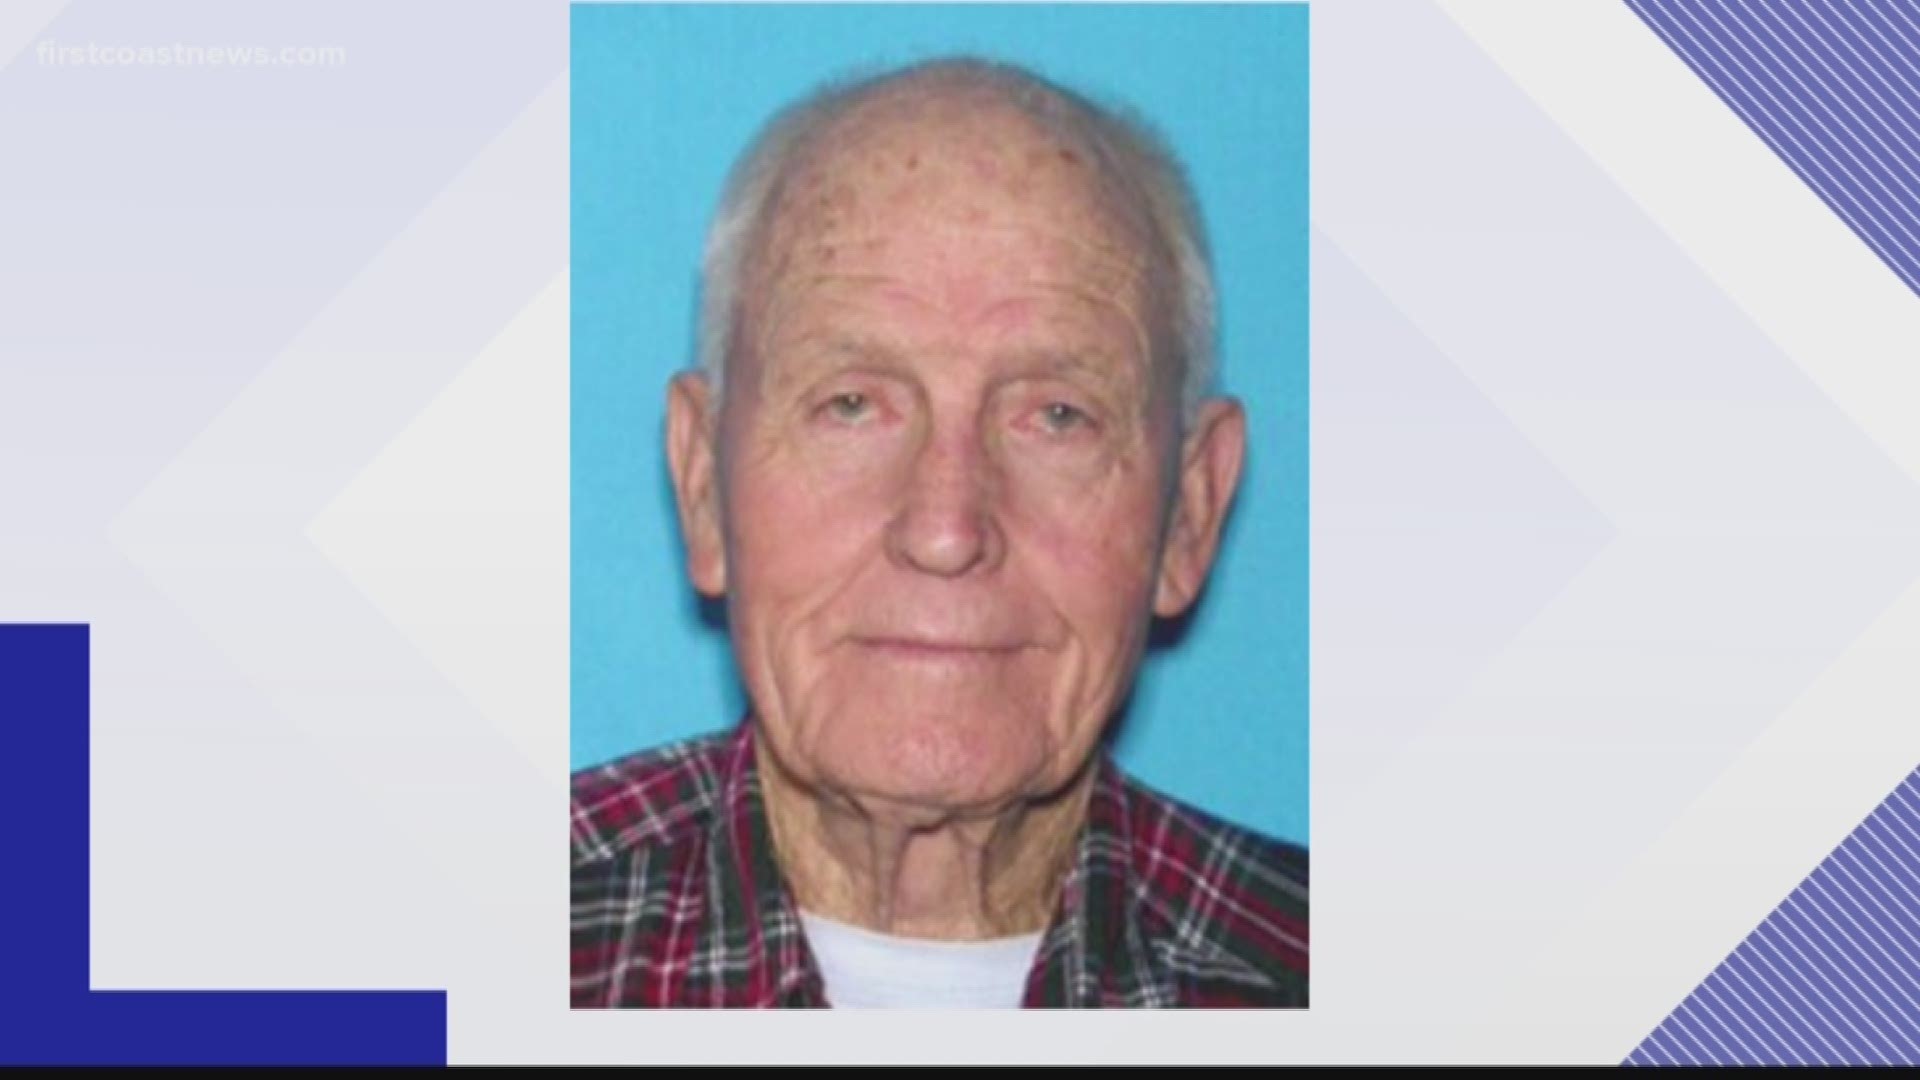 Police said Clifford Cersey, 92, drives a silver 2011 Toyota Venza with a Florida tag of EQFN66.